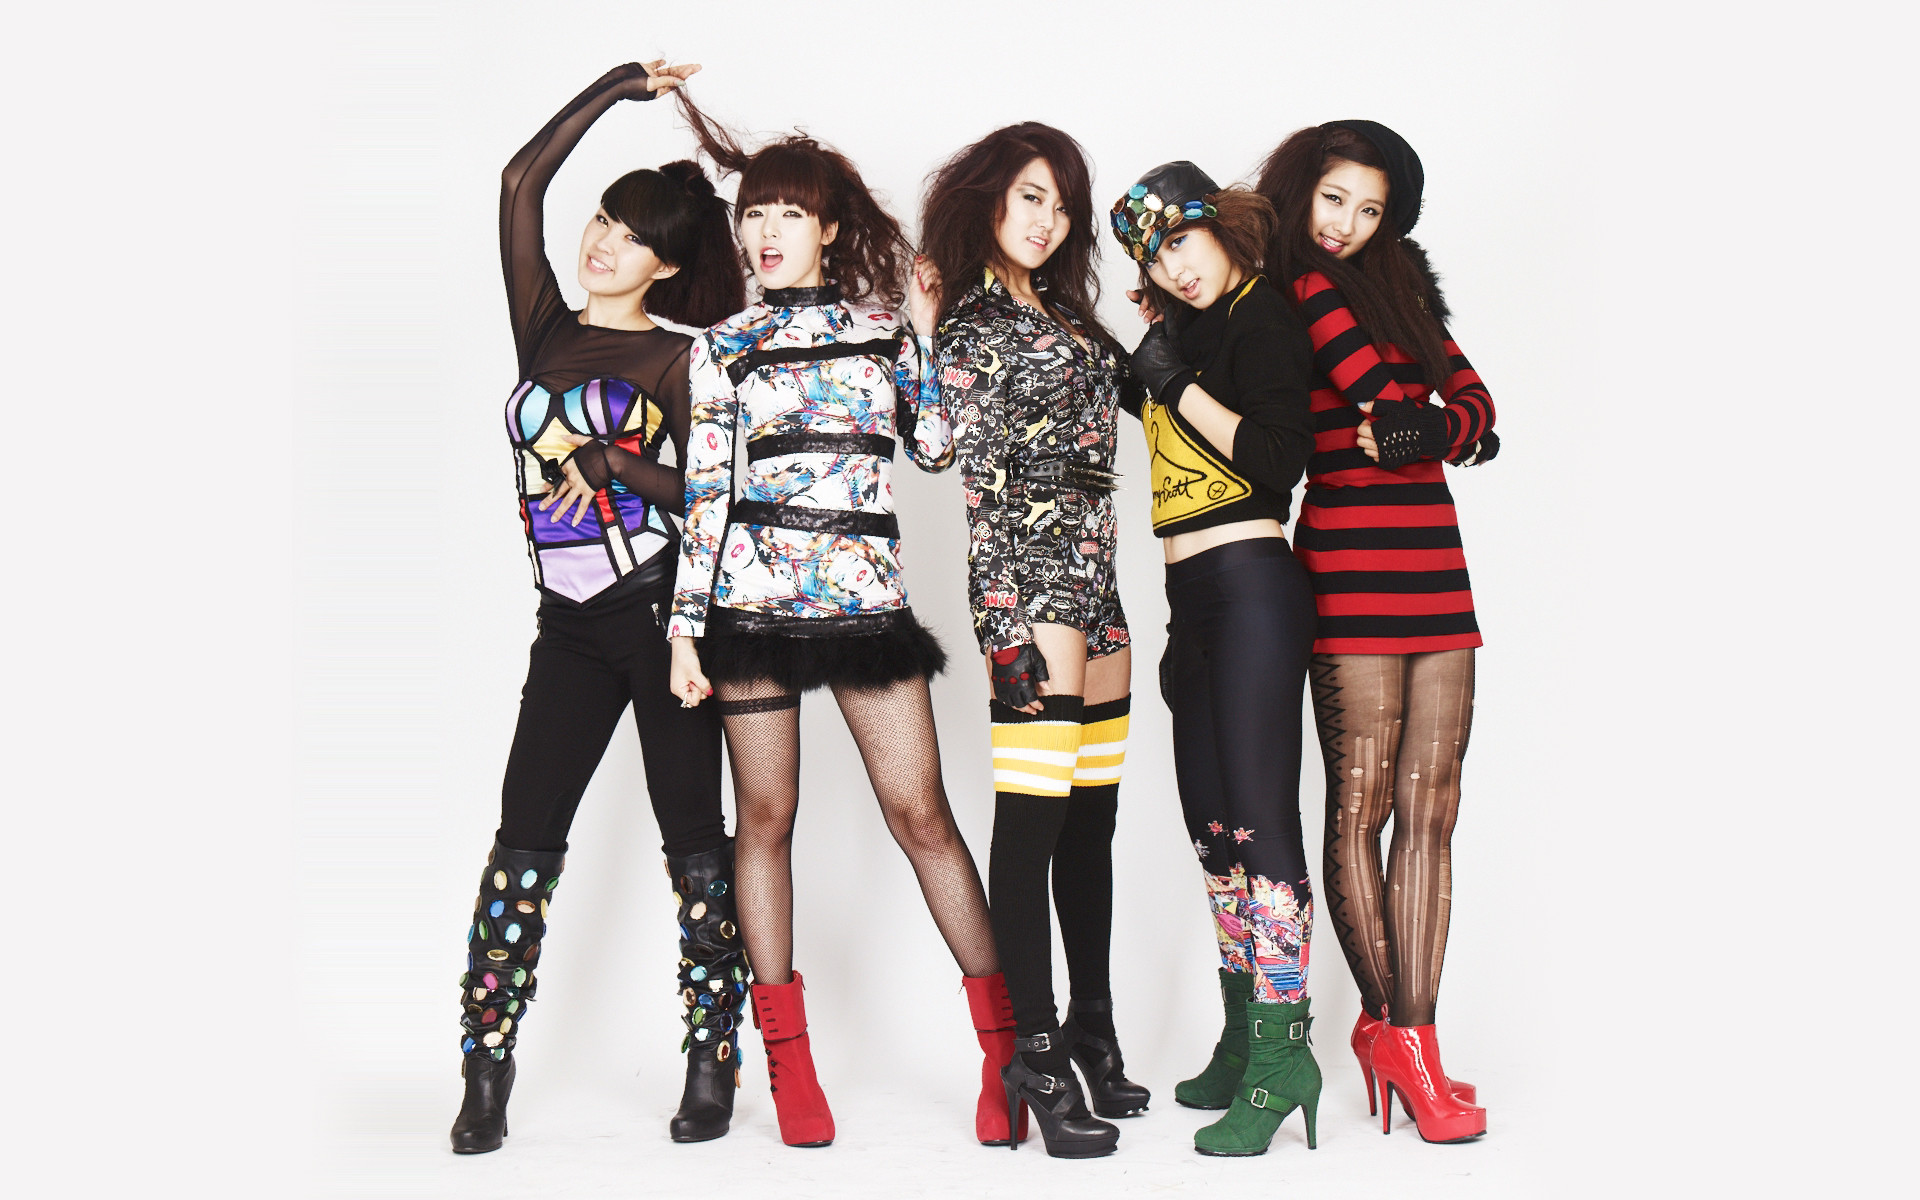 1920x1200 4Minute Â· download 4Minute image